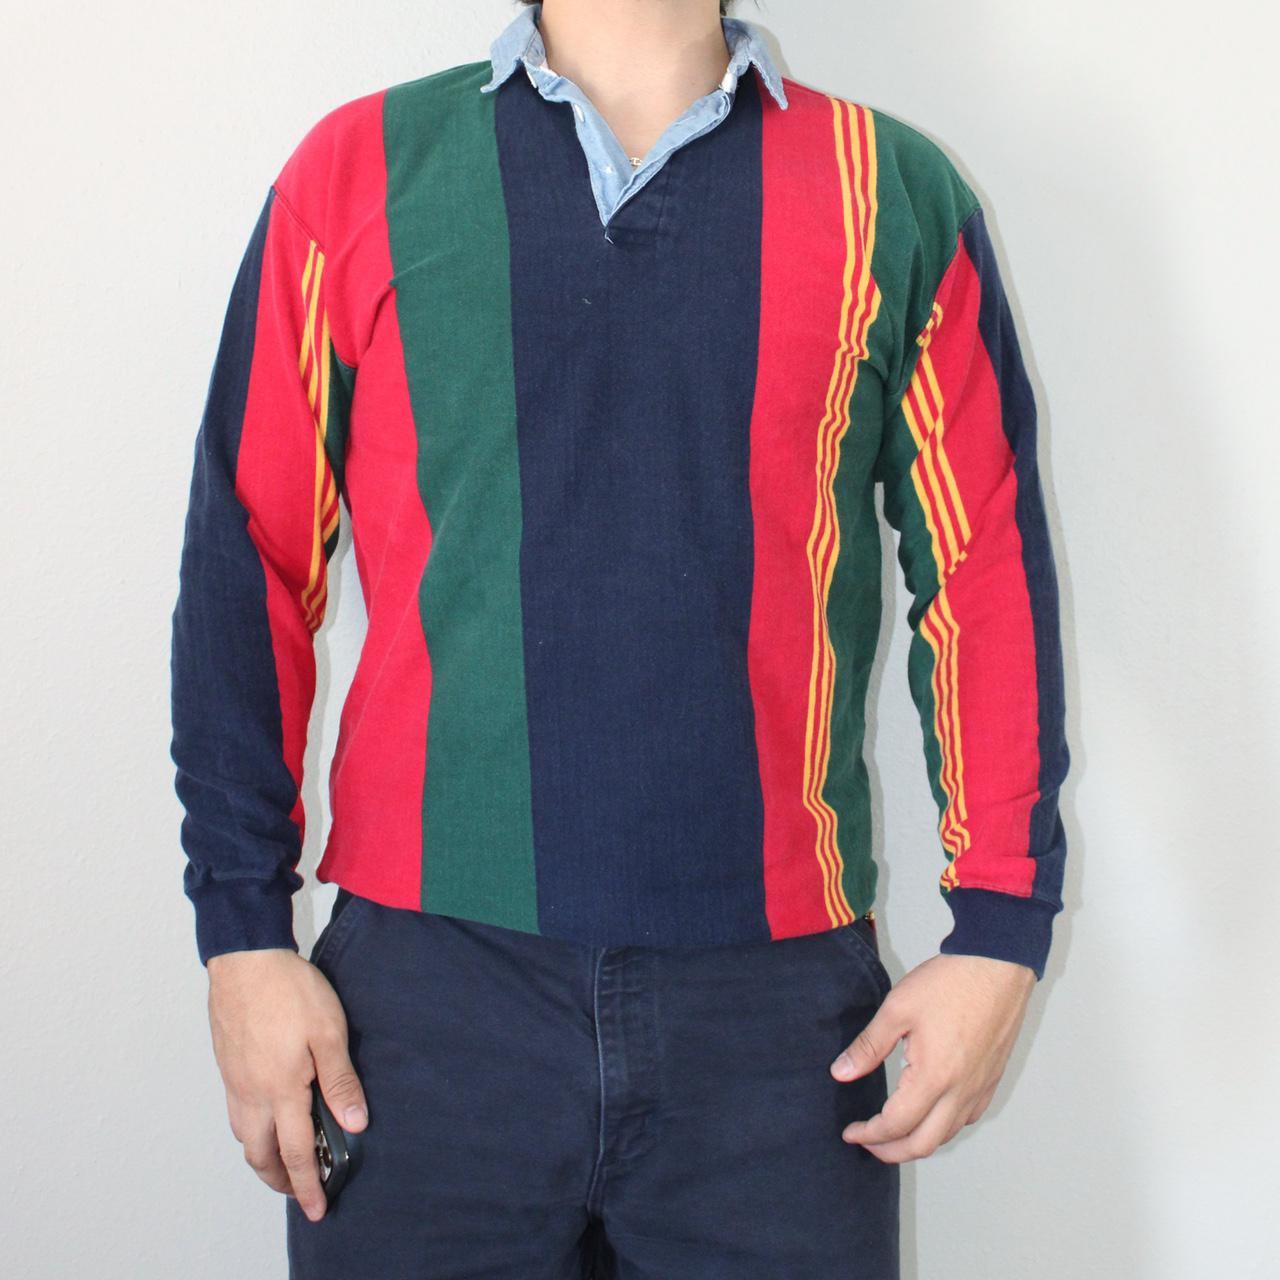 Product Image 1 - Vintage Striped Polo Shirt 

Excellent